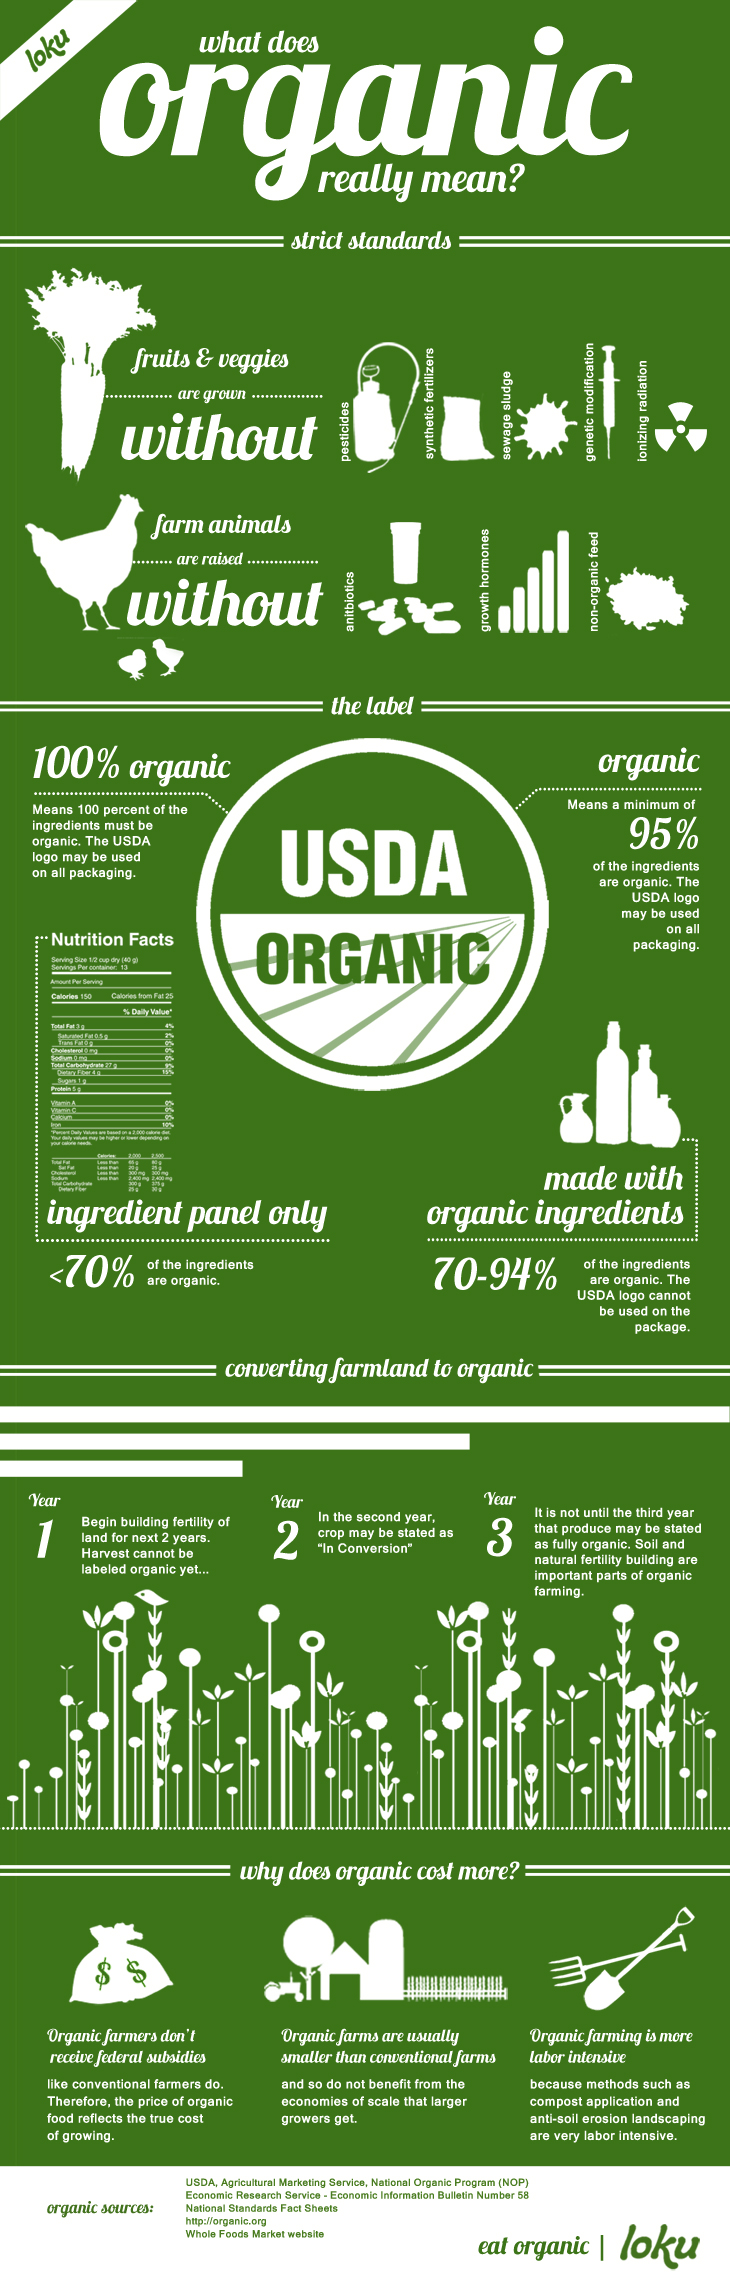 Facts About Organic Food